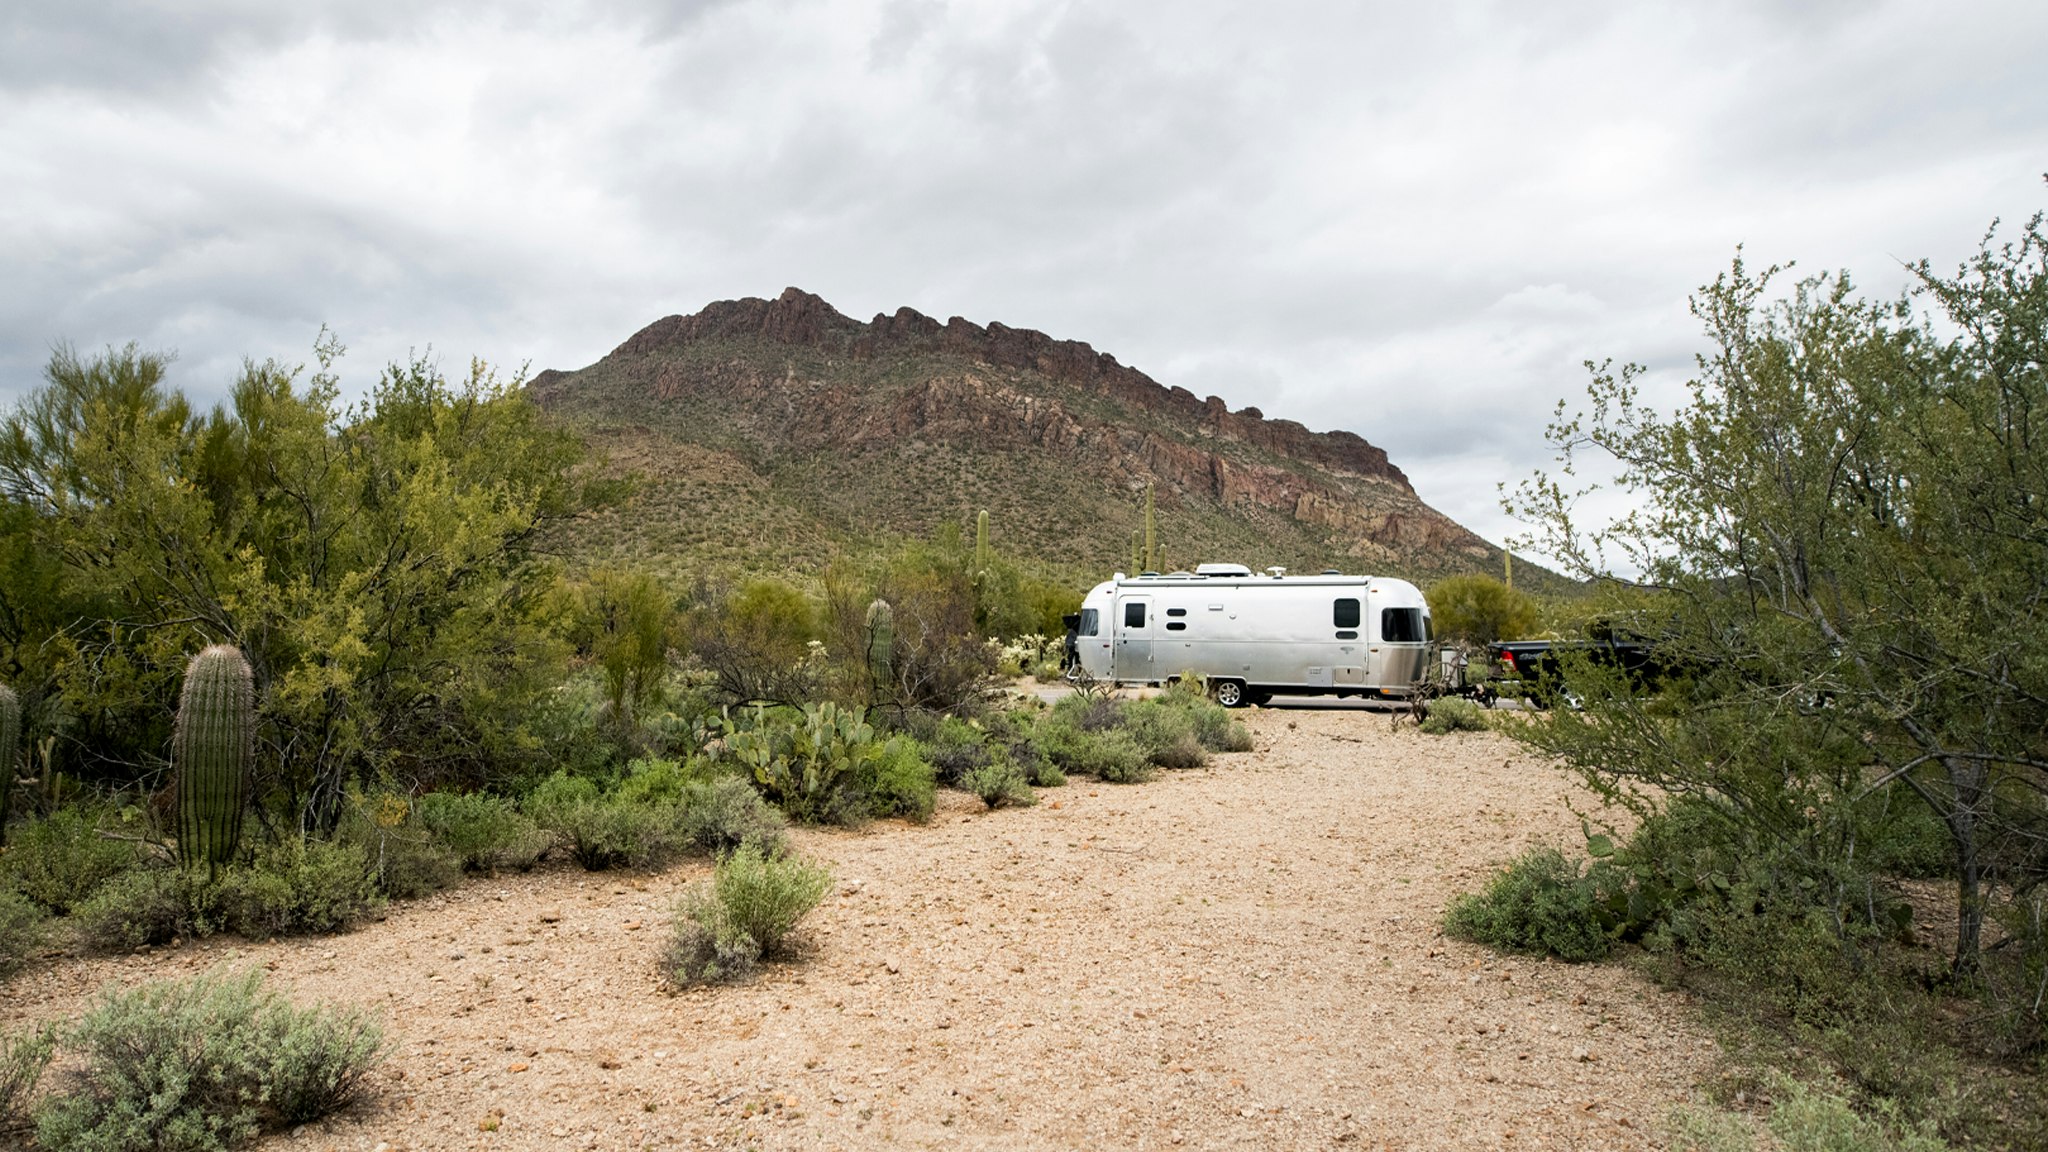 An Airstream boondocking in the dessert and is hooked up to a truck.